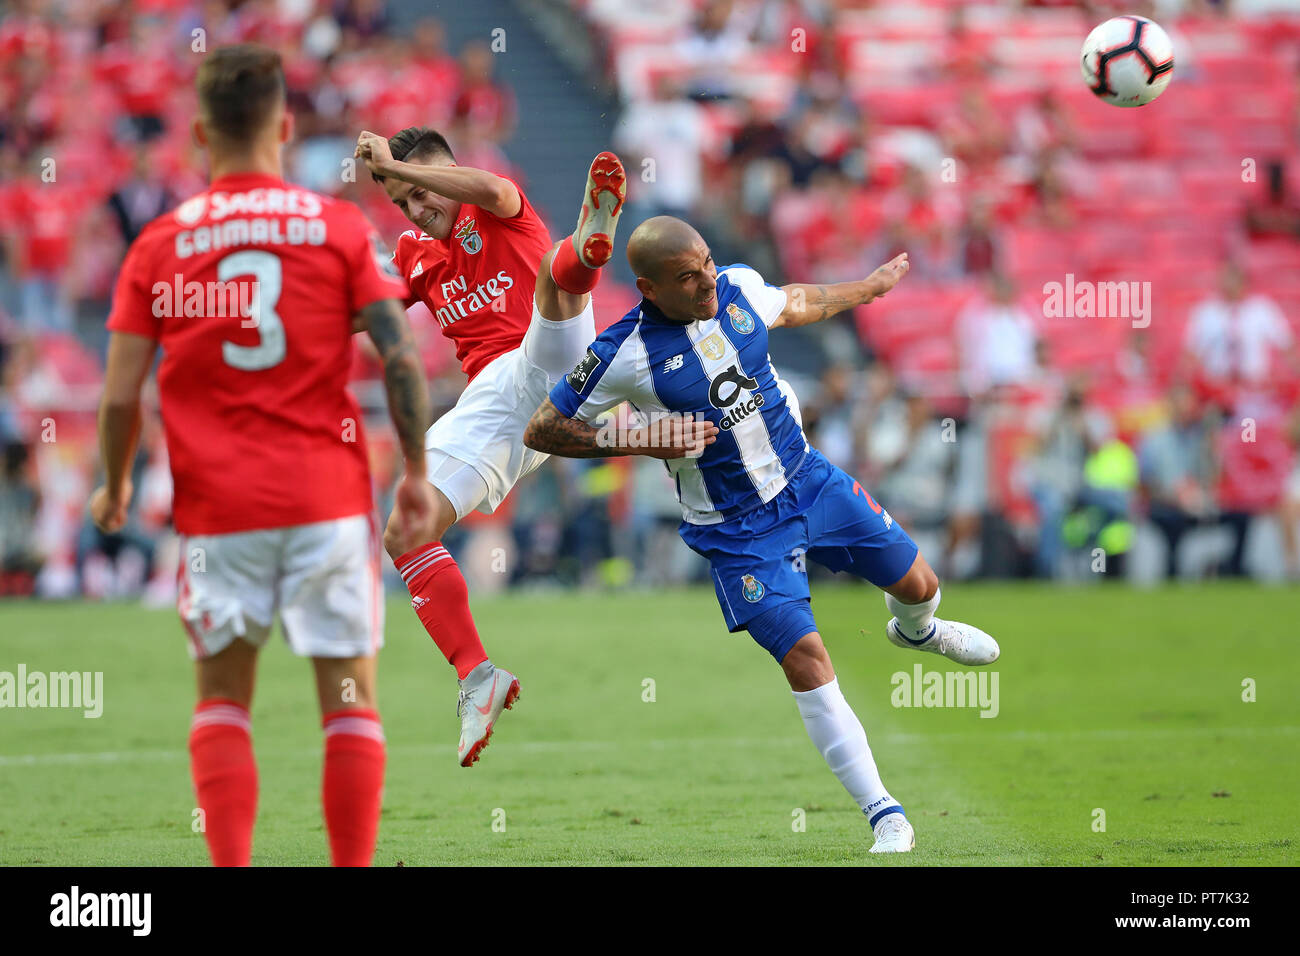 Lisbon, Portugal, Portugal. 7th Oct, 2018. Franco Cervi of SL Benfica (Lwith Maxi Pereira of FC Porto (R) seen in action during League NOS 2018/19 football match between SL Benfica vs FC Porto. Credit: David Martins/SOPA Images/ZUMA Wire/Alamy Live News Stock Photo